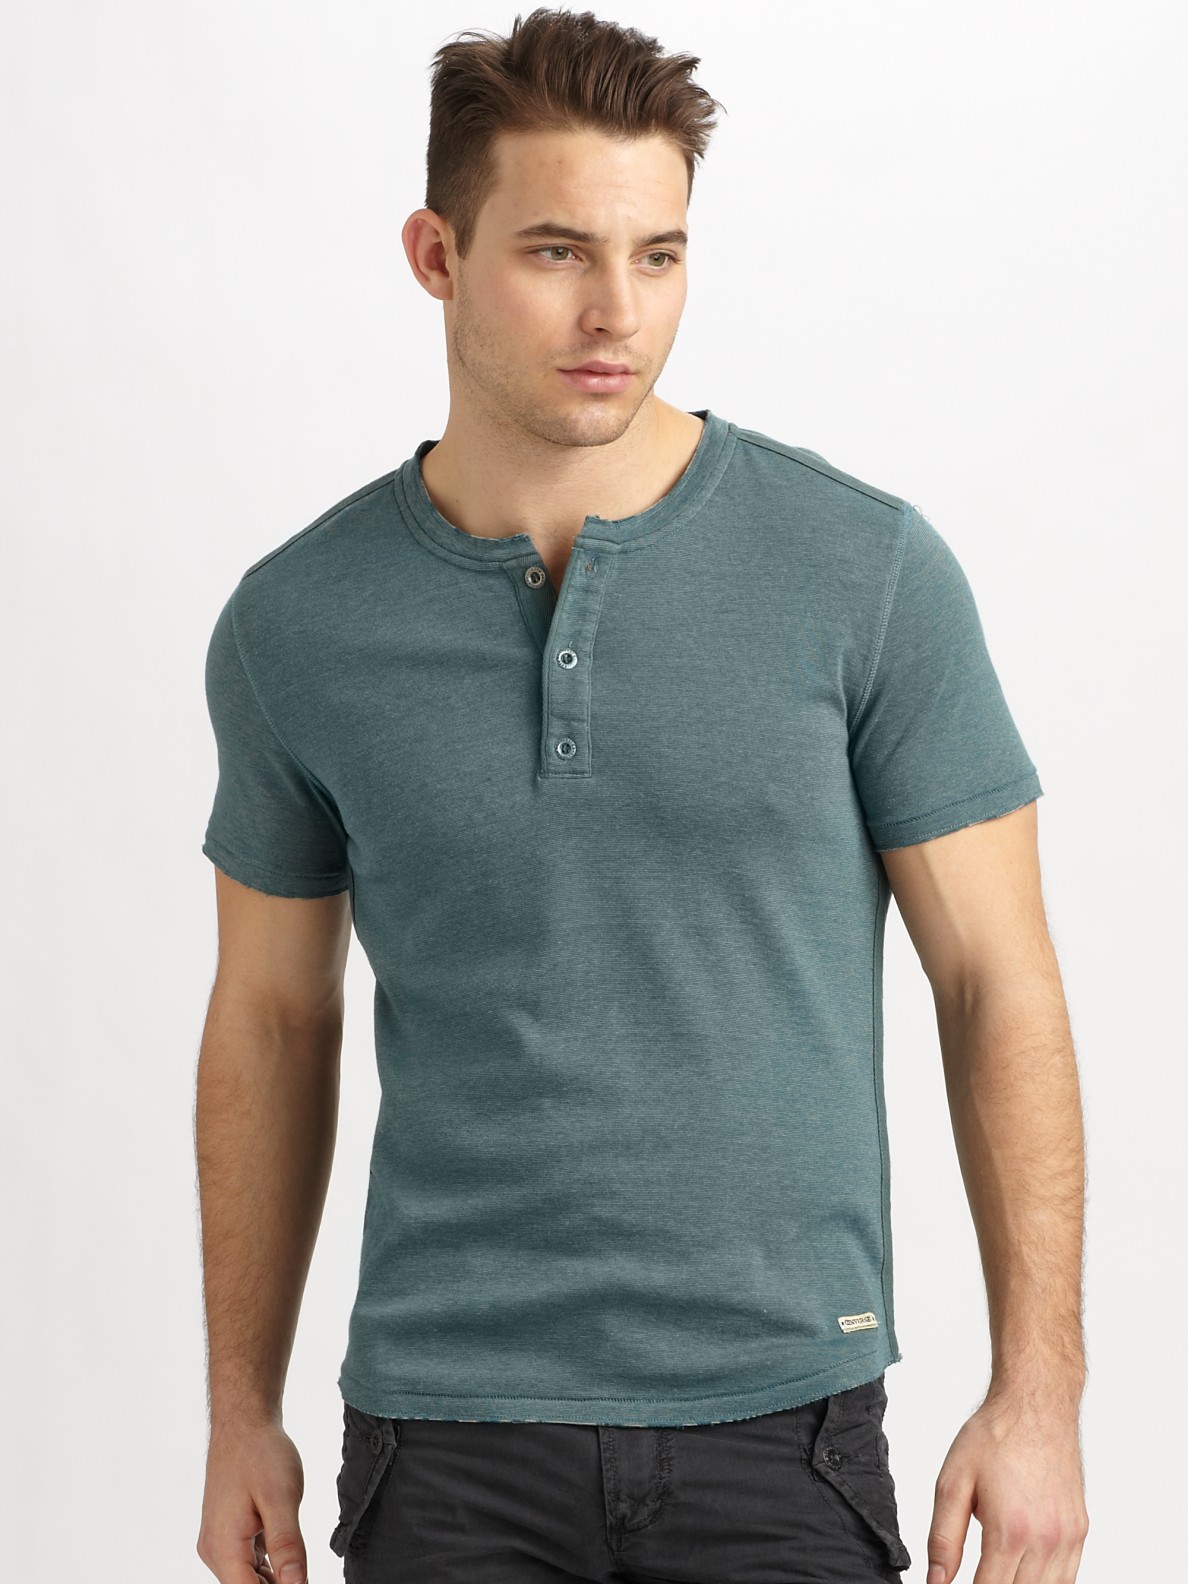 Converse Short-sleeve Ribbed Henley in Blue for Men - Lyst